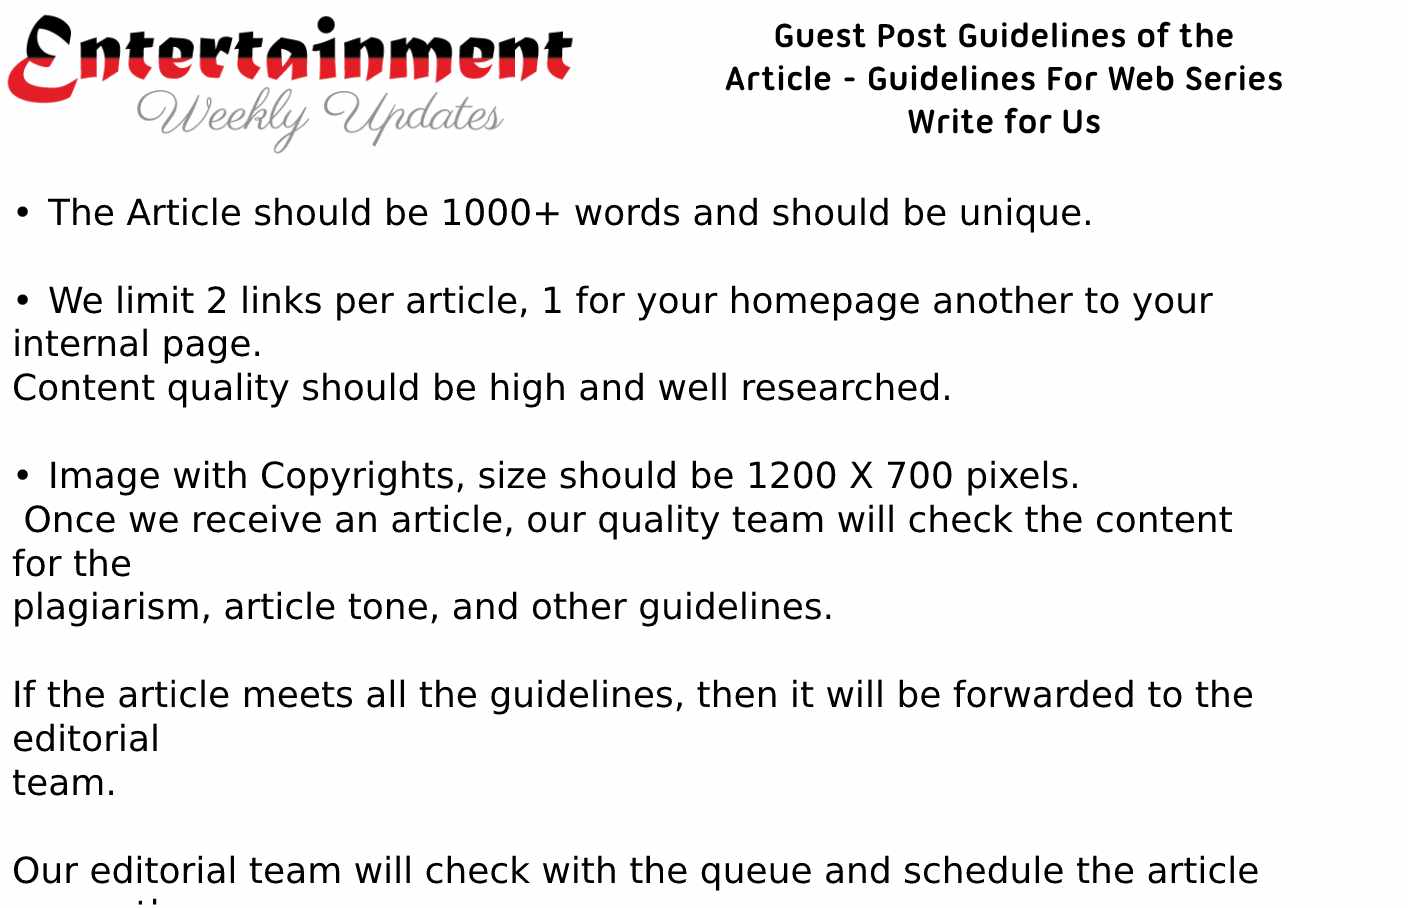 Guidelines For Web Series Write for Us